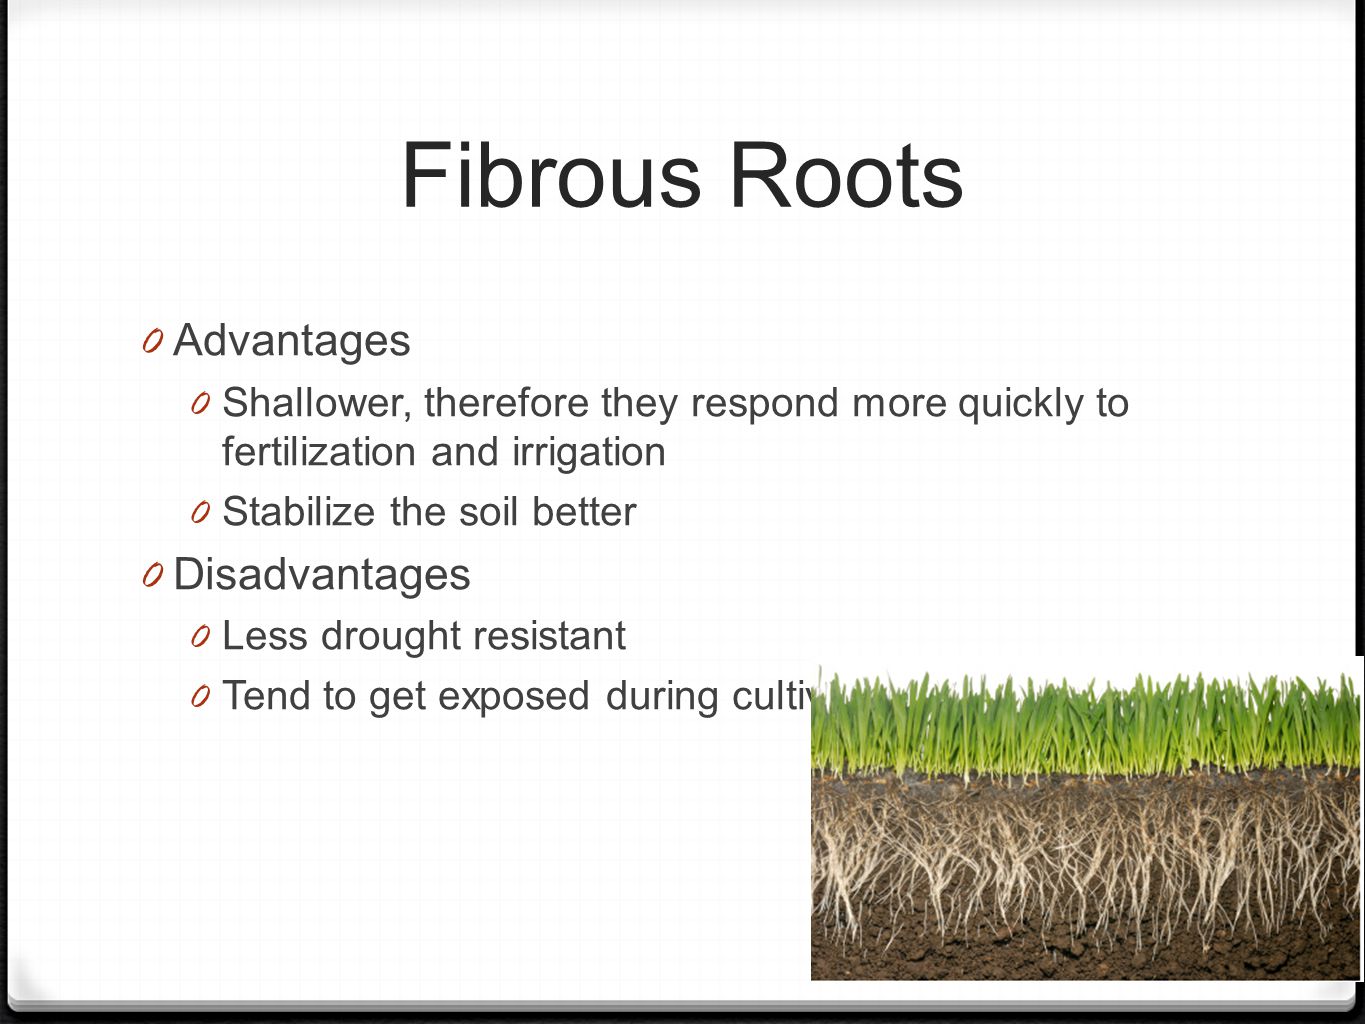 Fibrous Roots 0 Advantages 0 Shallower, therefore they respond more quickly to fertilization and irrigation 0 Stabilize the soil better 0 Disadvantages 0 Less drought resistant 0 Tend to get exposed during cultivation